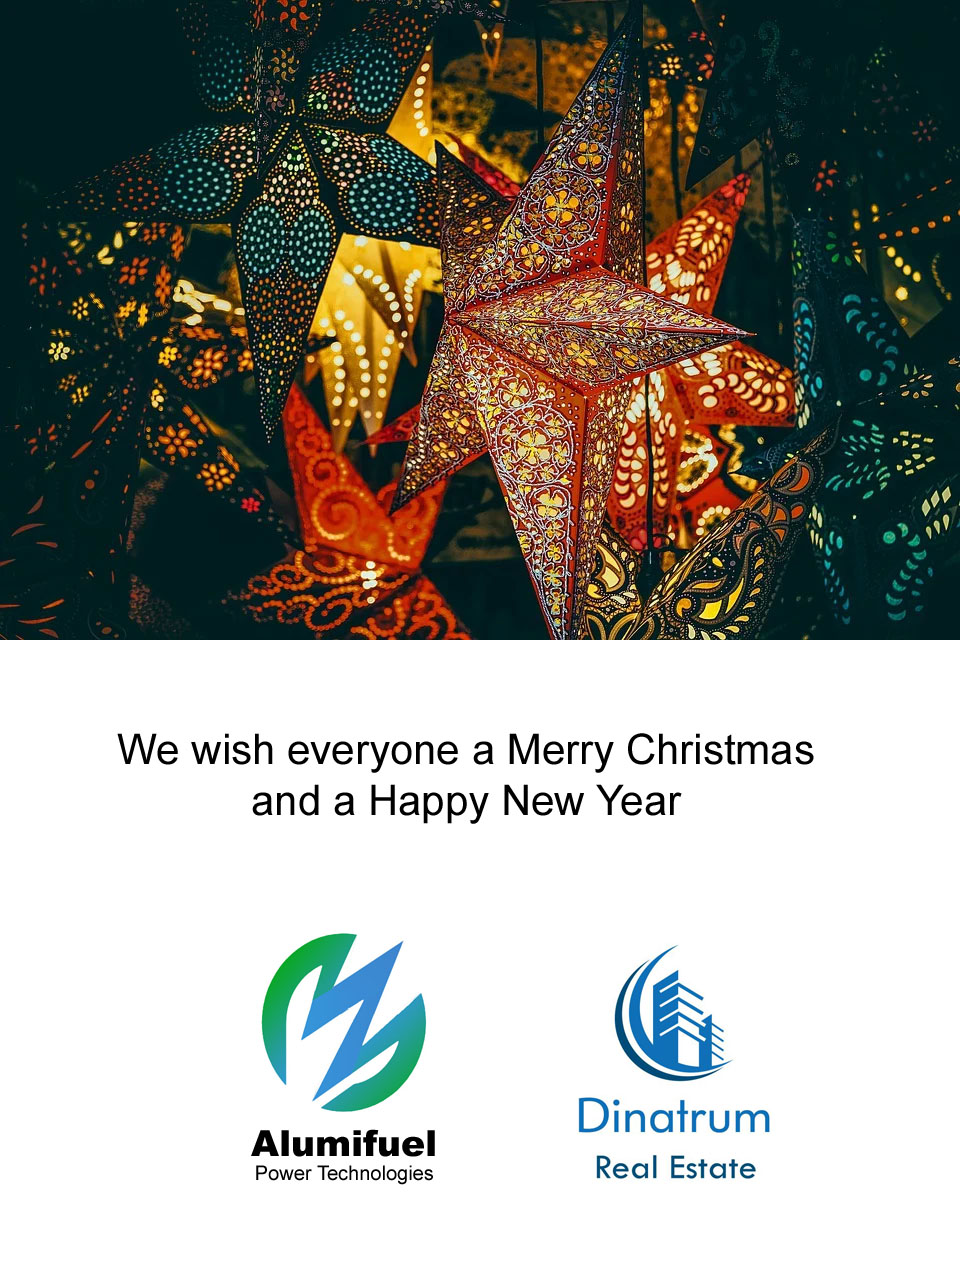 Dinatrum and Alumifuel wish everyone a Merry Christmas and a Happy New Year!